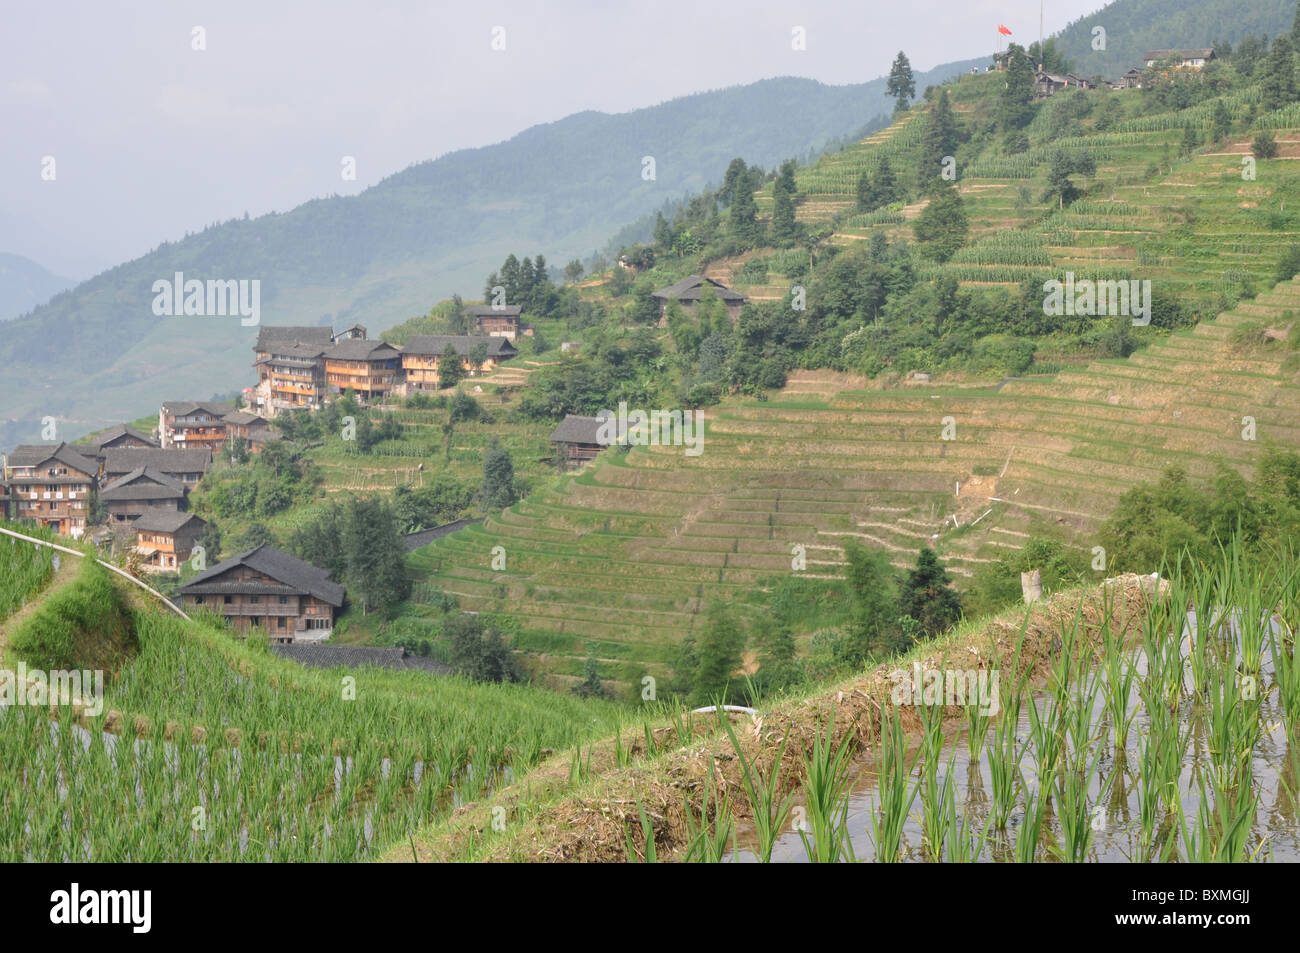 Wooden buildings in a stunning scenery at Longji Rice Terrace, Southern China Stock Photo